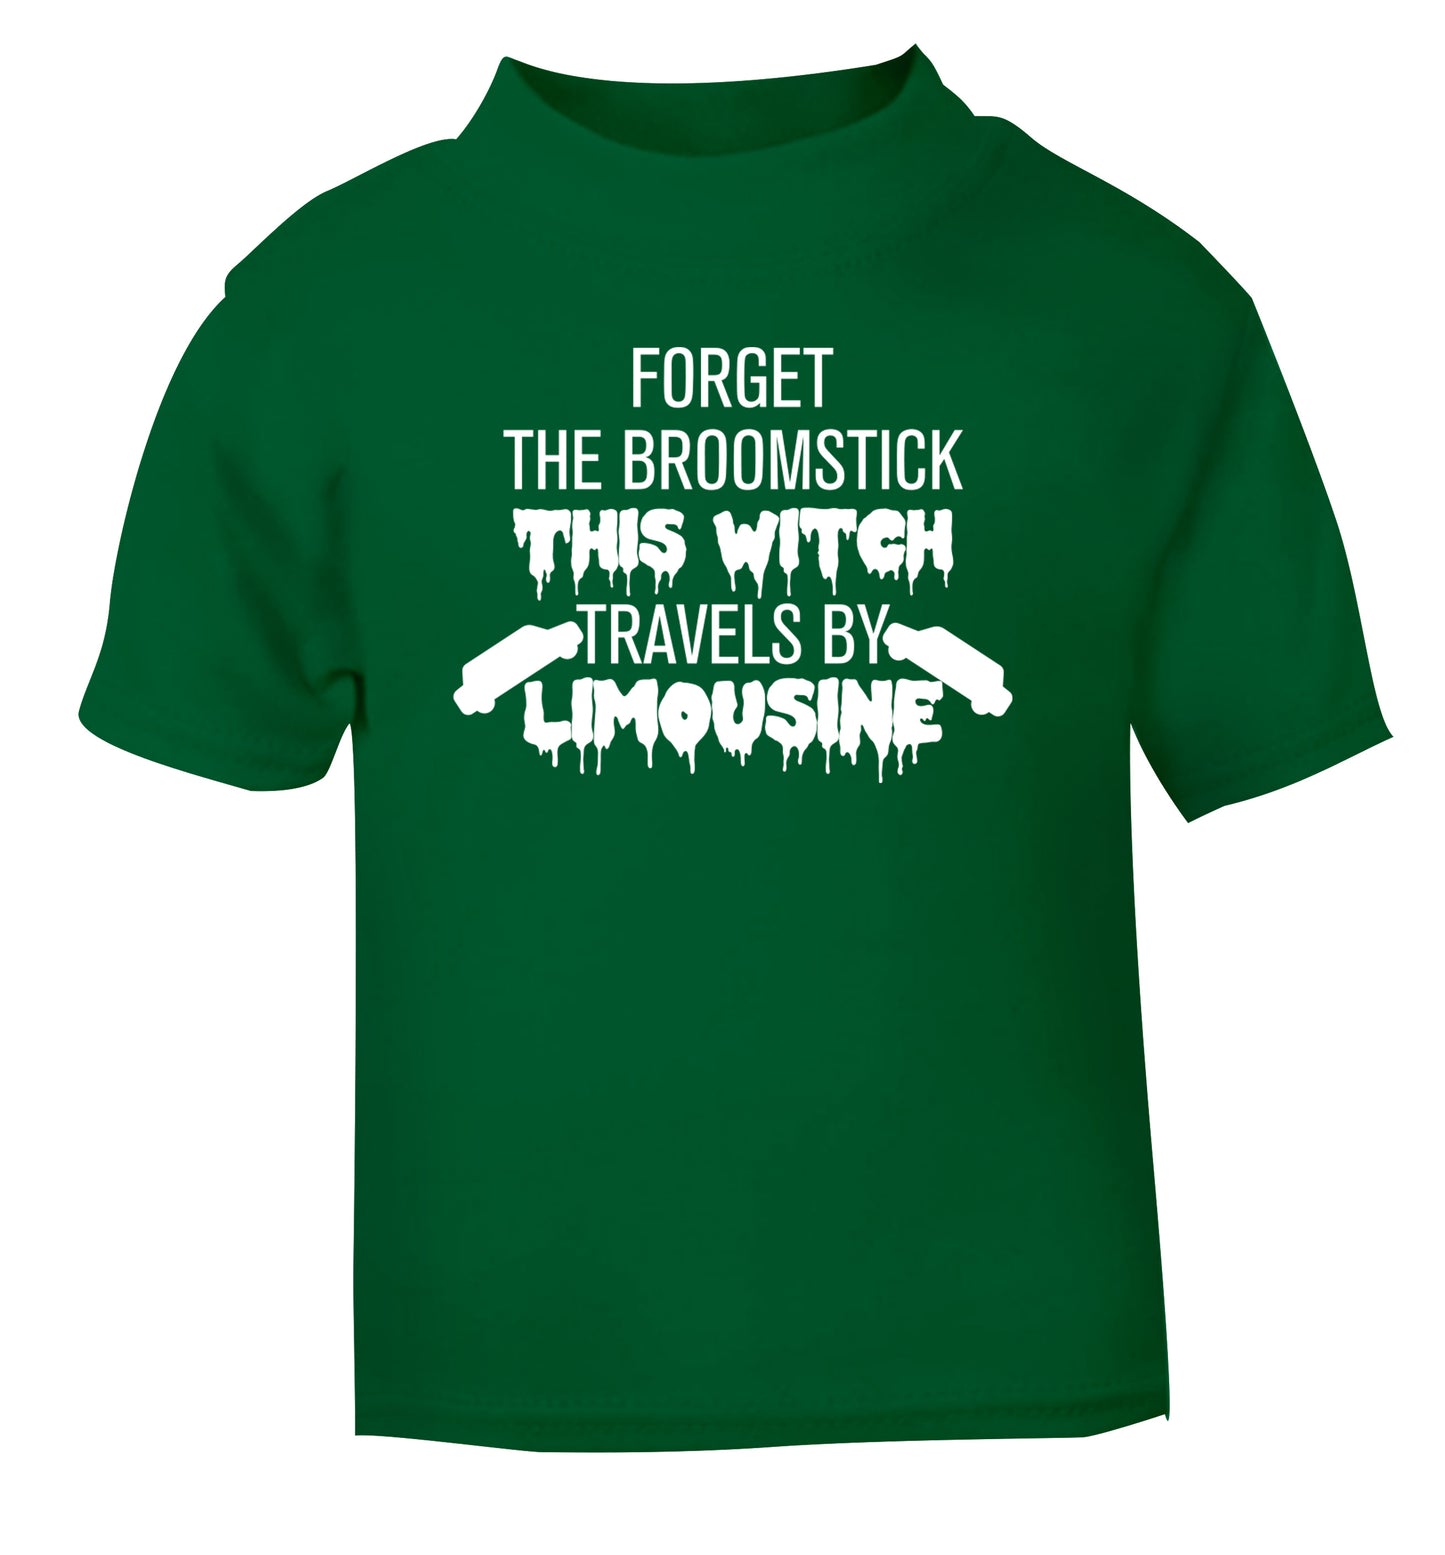 Forget the broomstick this witch travels by limousine green Baby Toddler Tshirt 2 Years